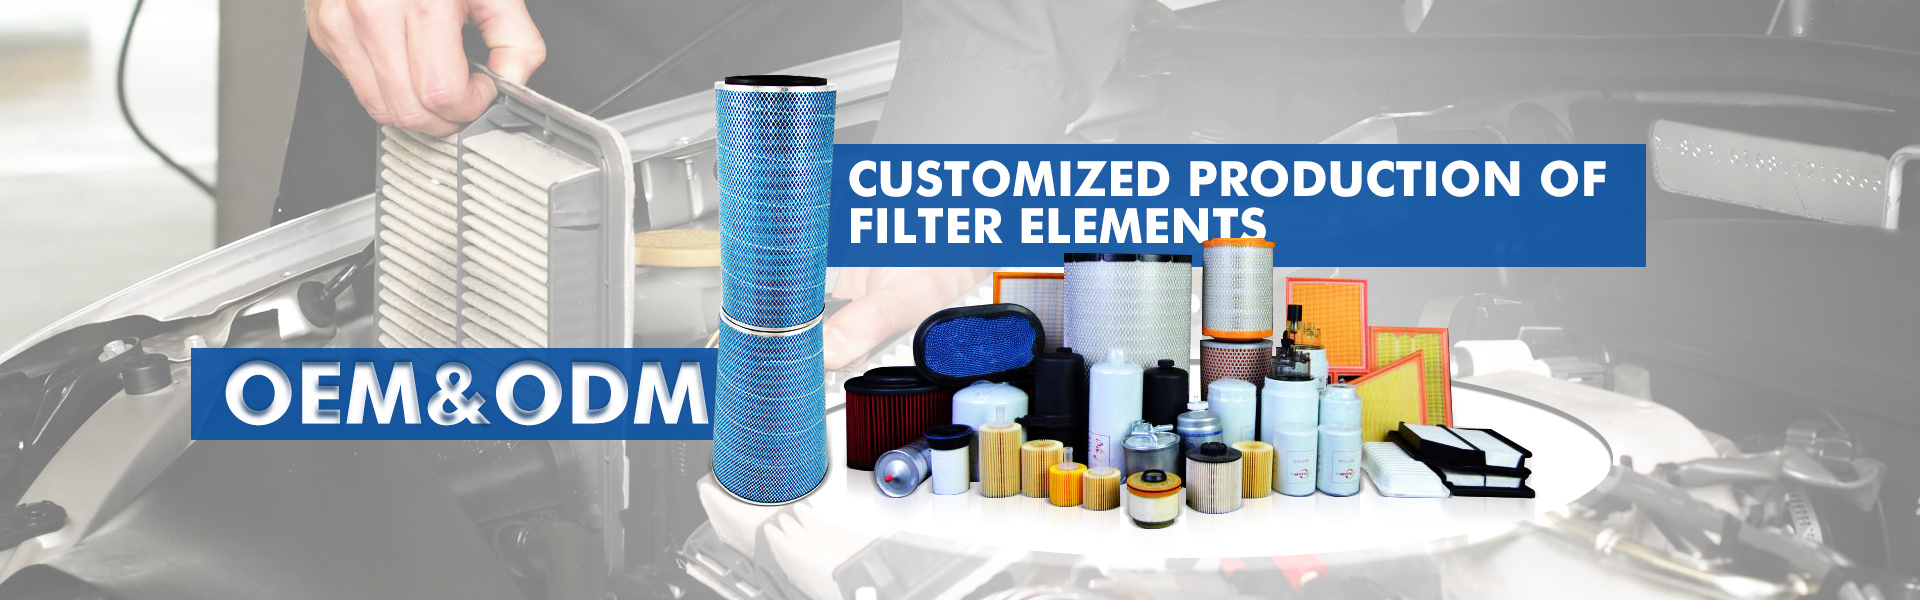 CABIN AIR FILTER PRODUCTION SOLUTION